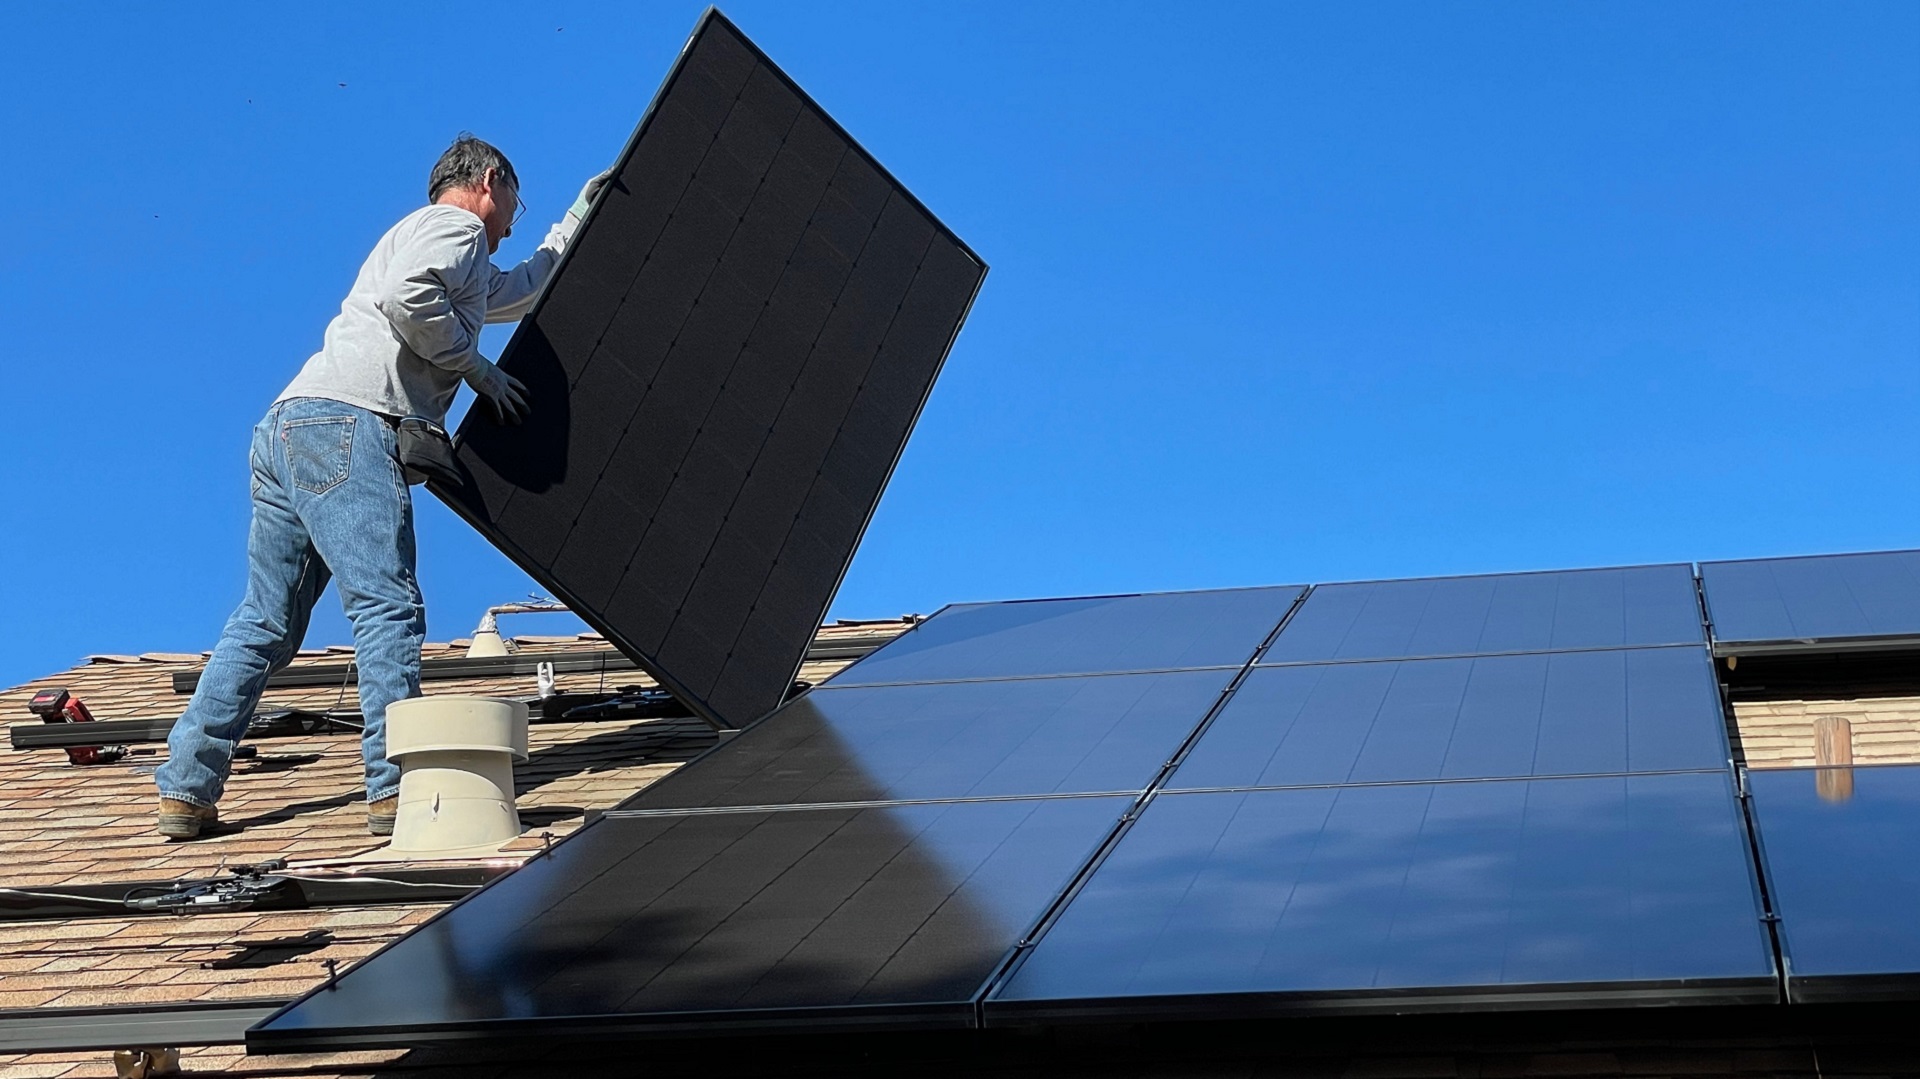 Fitting measures like solar panels can be monetised using carbon credits